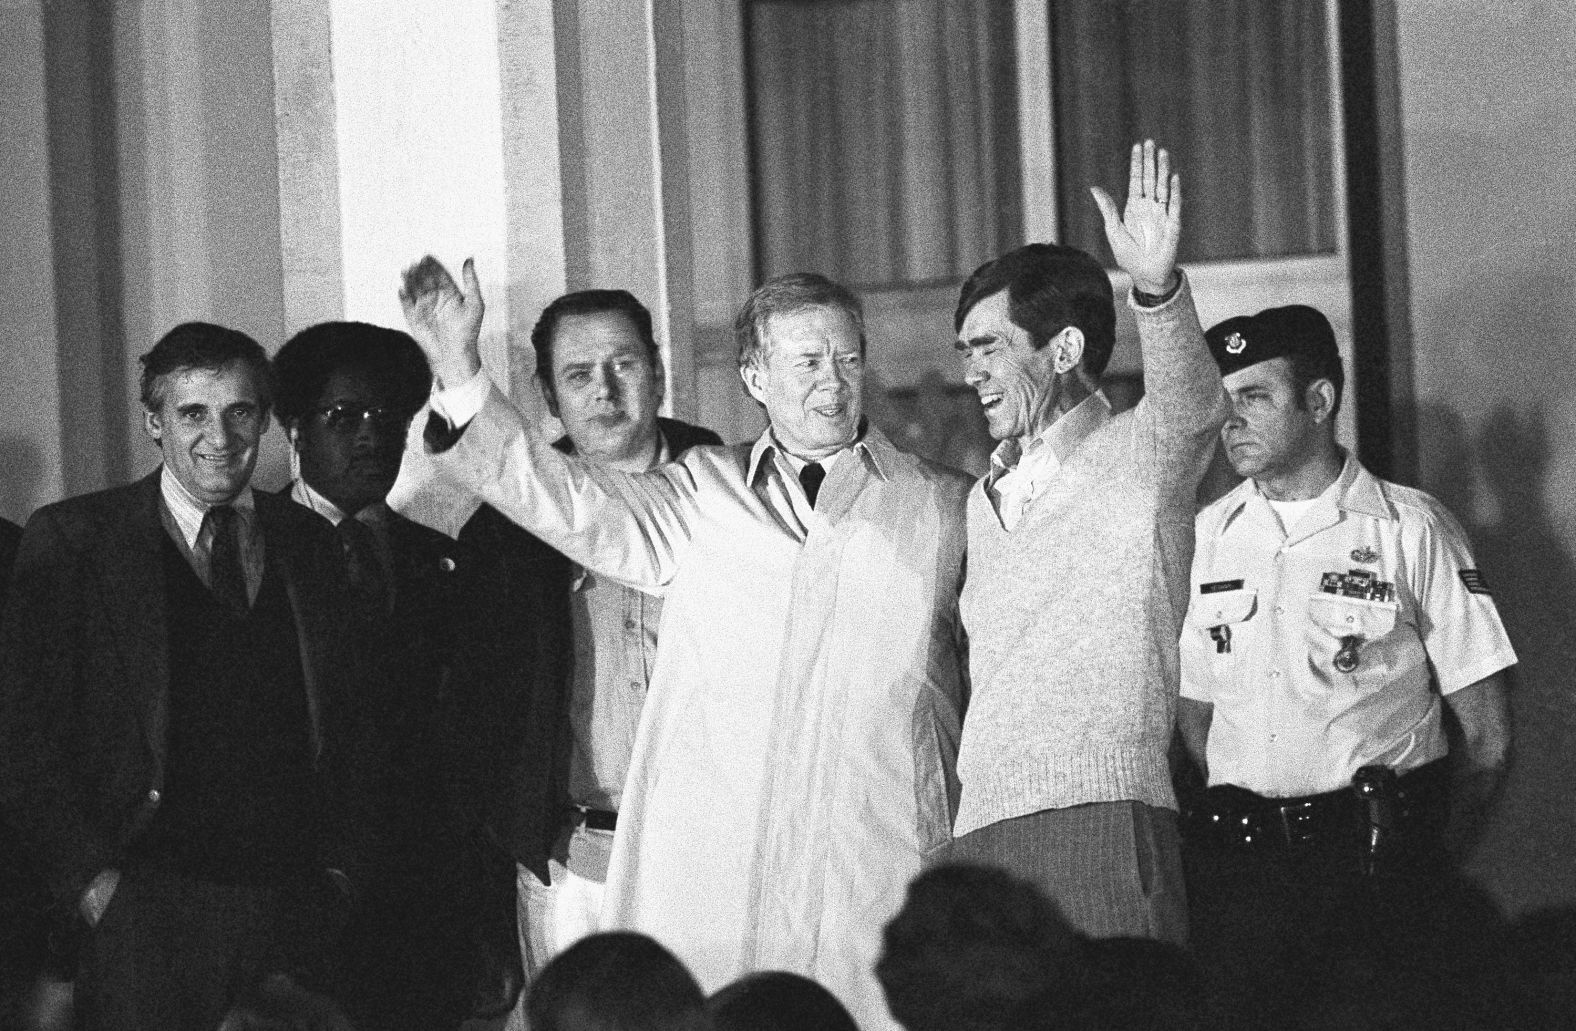 Carter traveled to Wiesbaden, West Germany, in January 1981 to greet the 52 American hostages who had been released by Iran after 444 days of captivity.